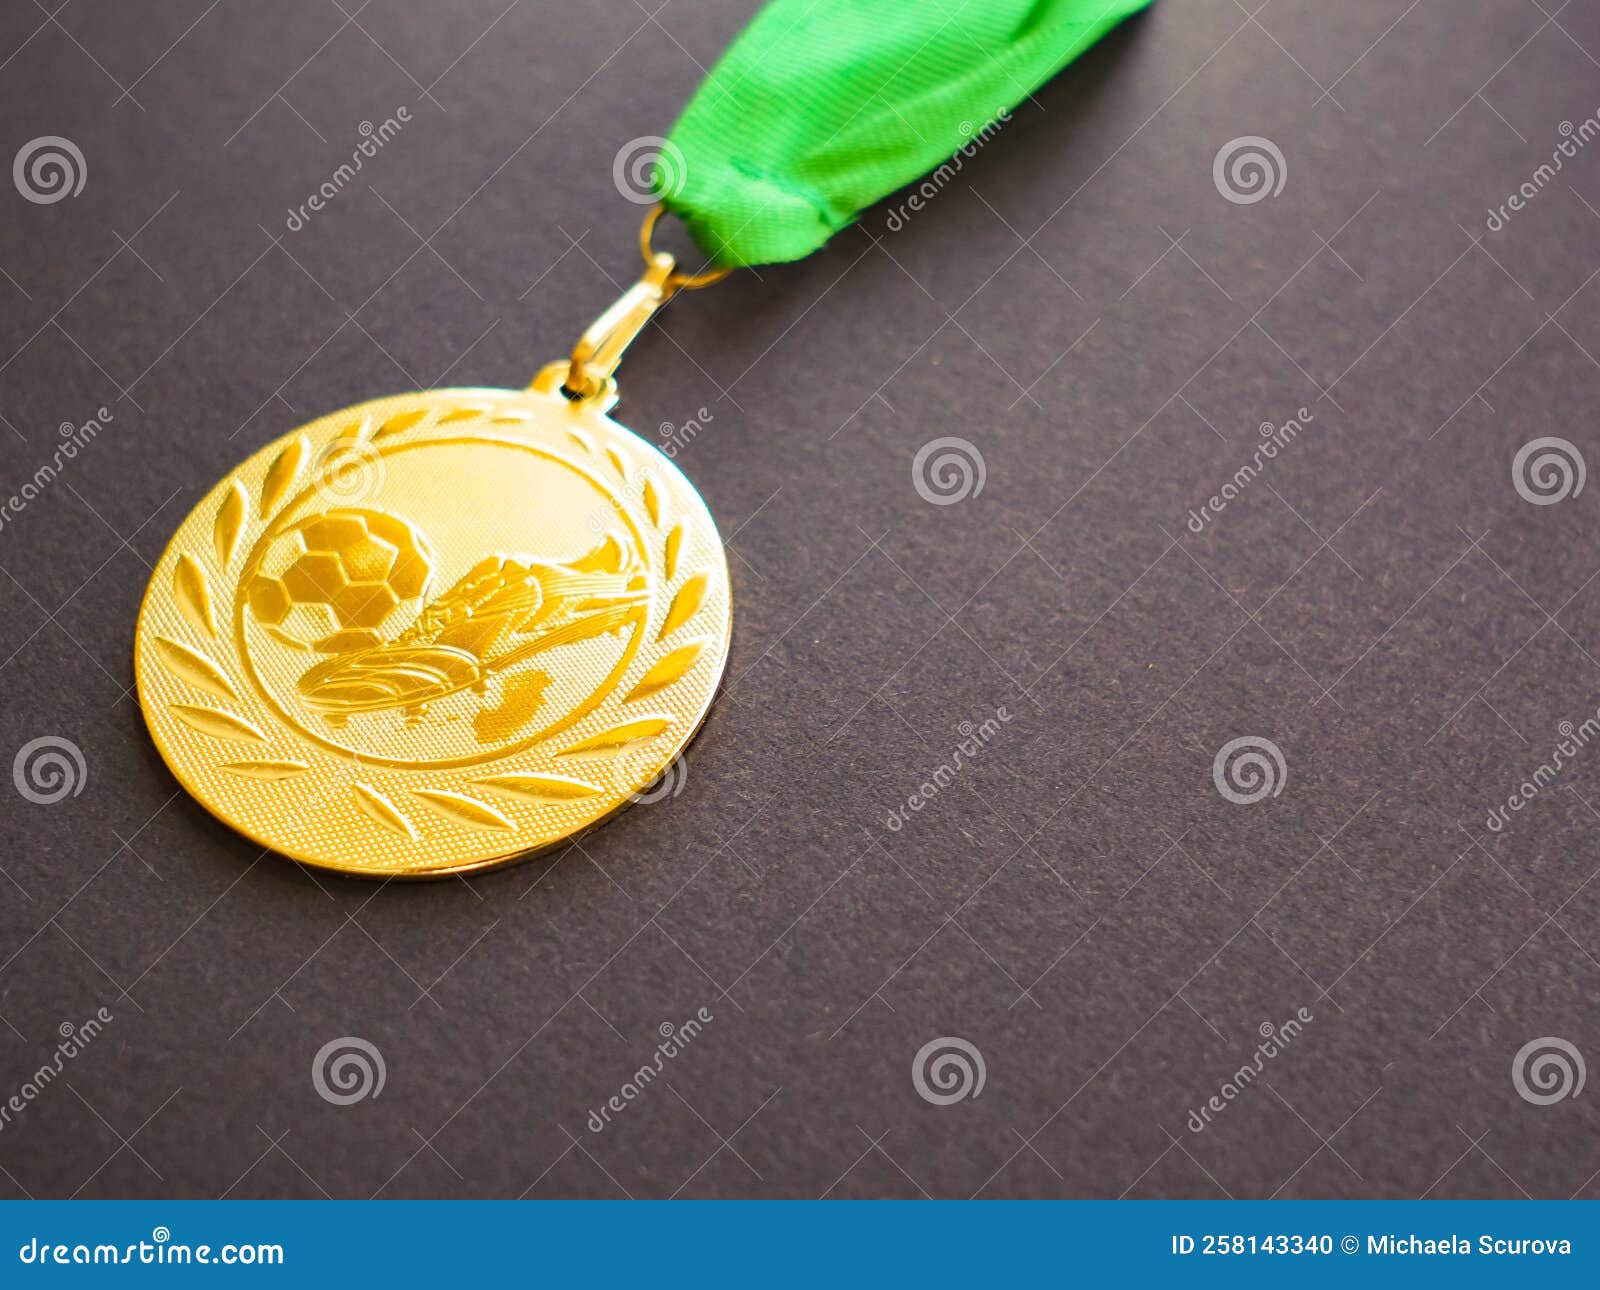 gold medal for the first place winner. concept of success